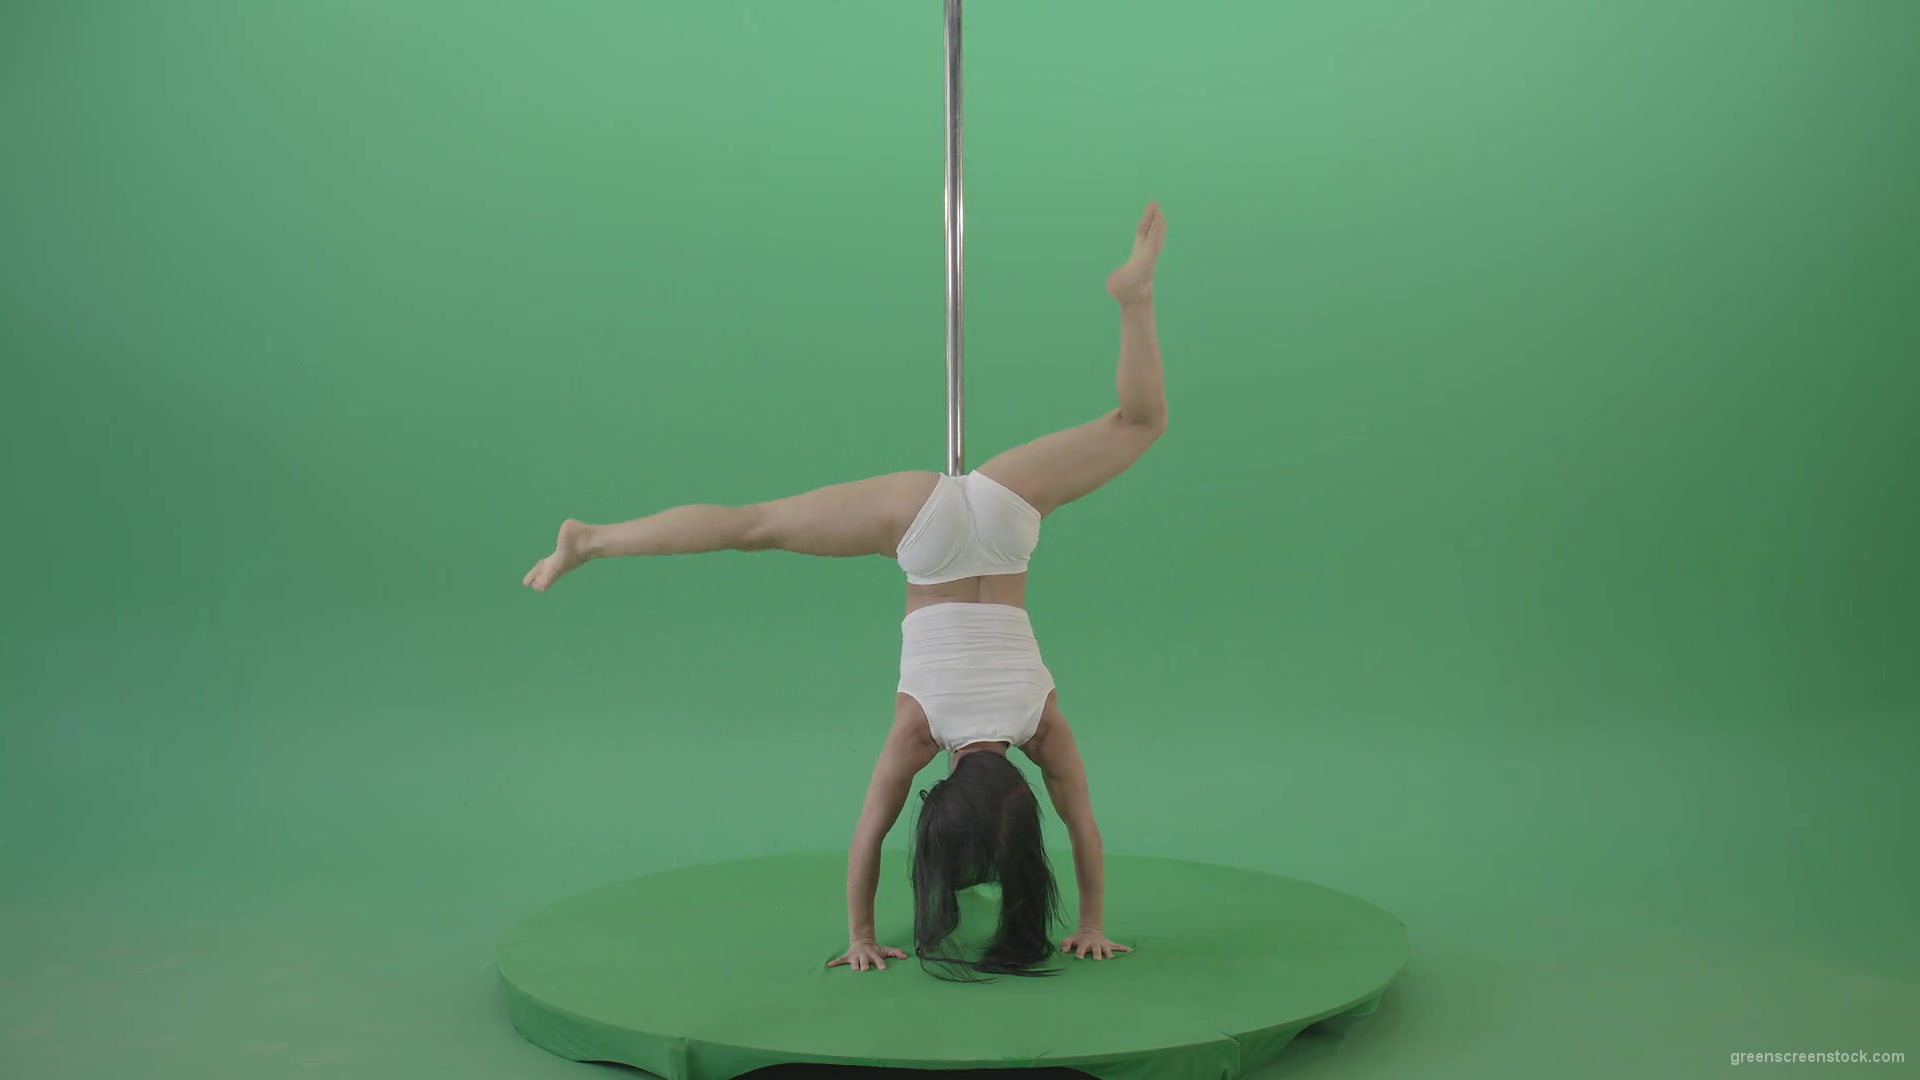 Pole-Dance-Girl-waving-two-legs-isolated-on-green-screen-4K-Video-Footage-1920_006 Green Screen Stock